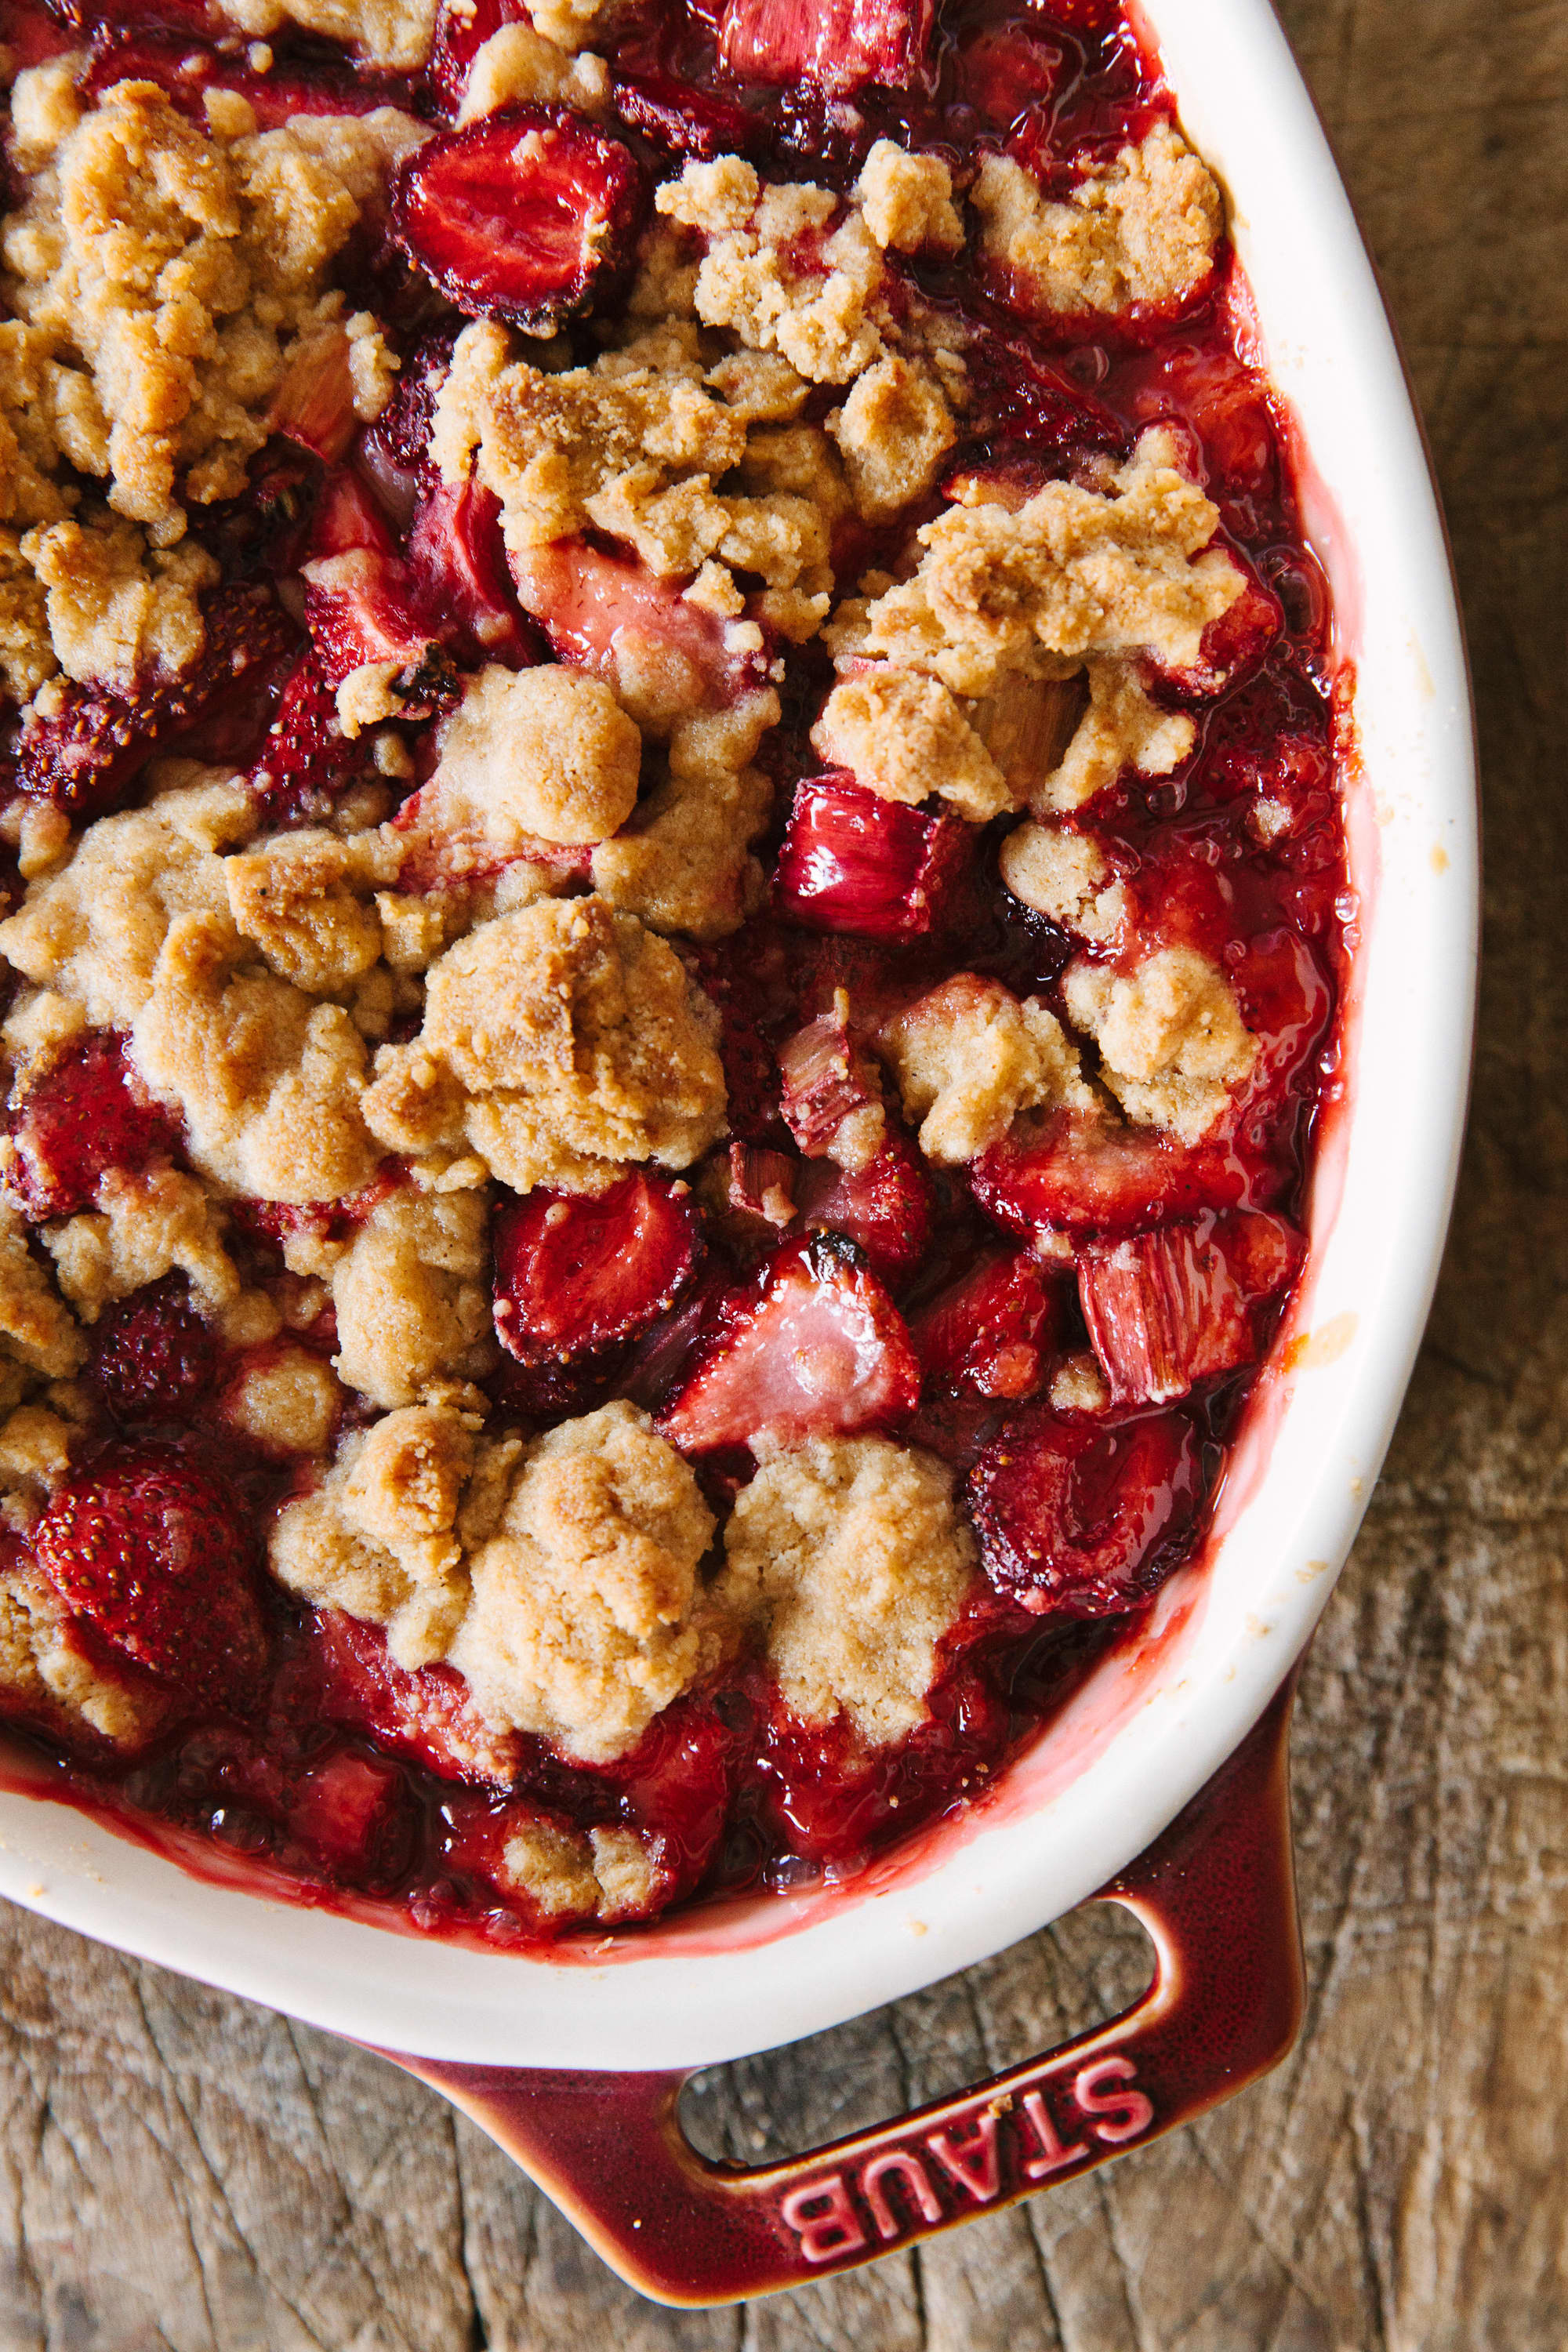 How To Make a Fruit Crumble